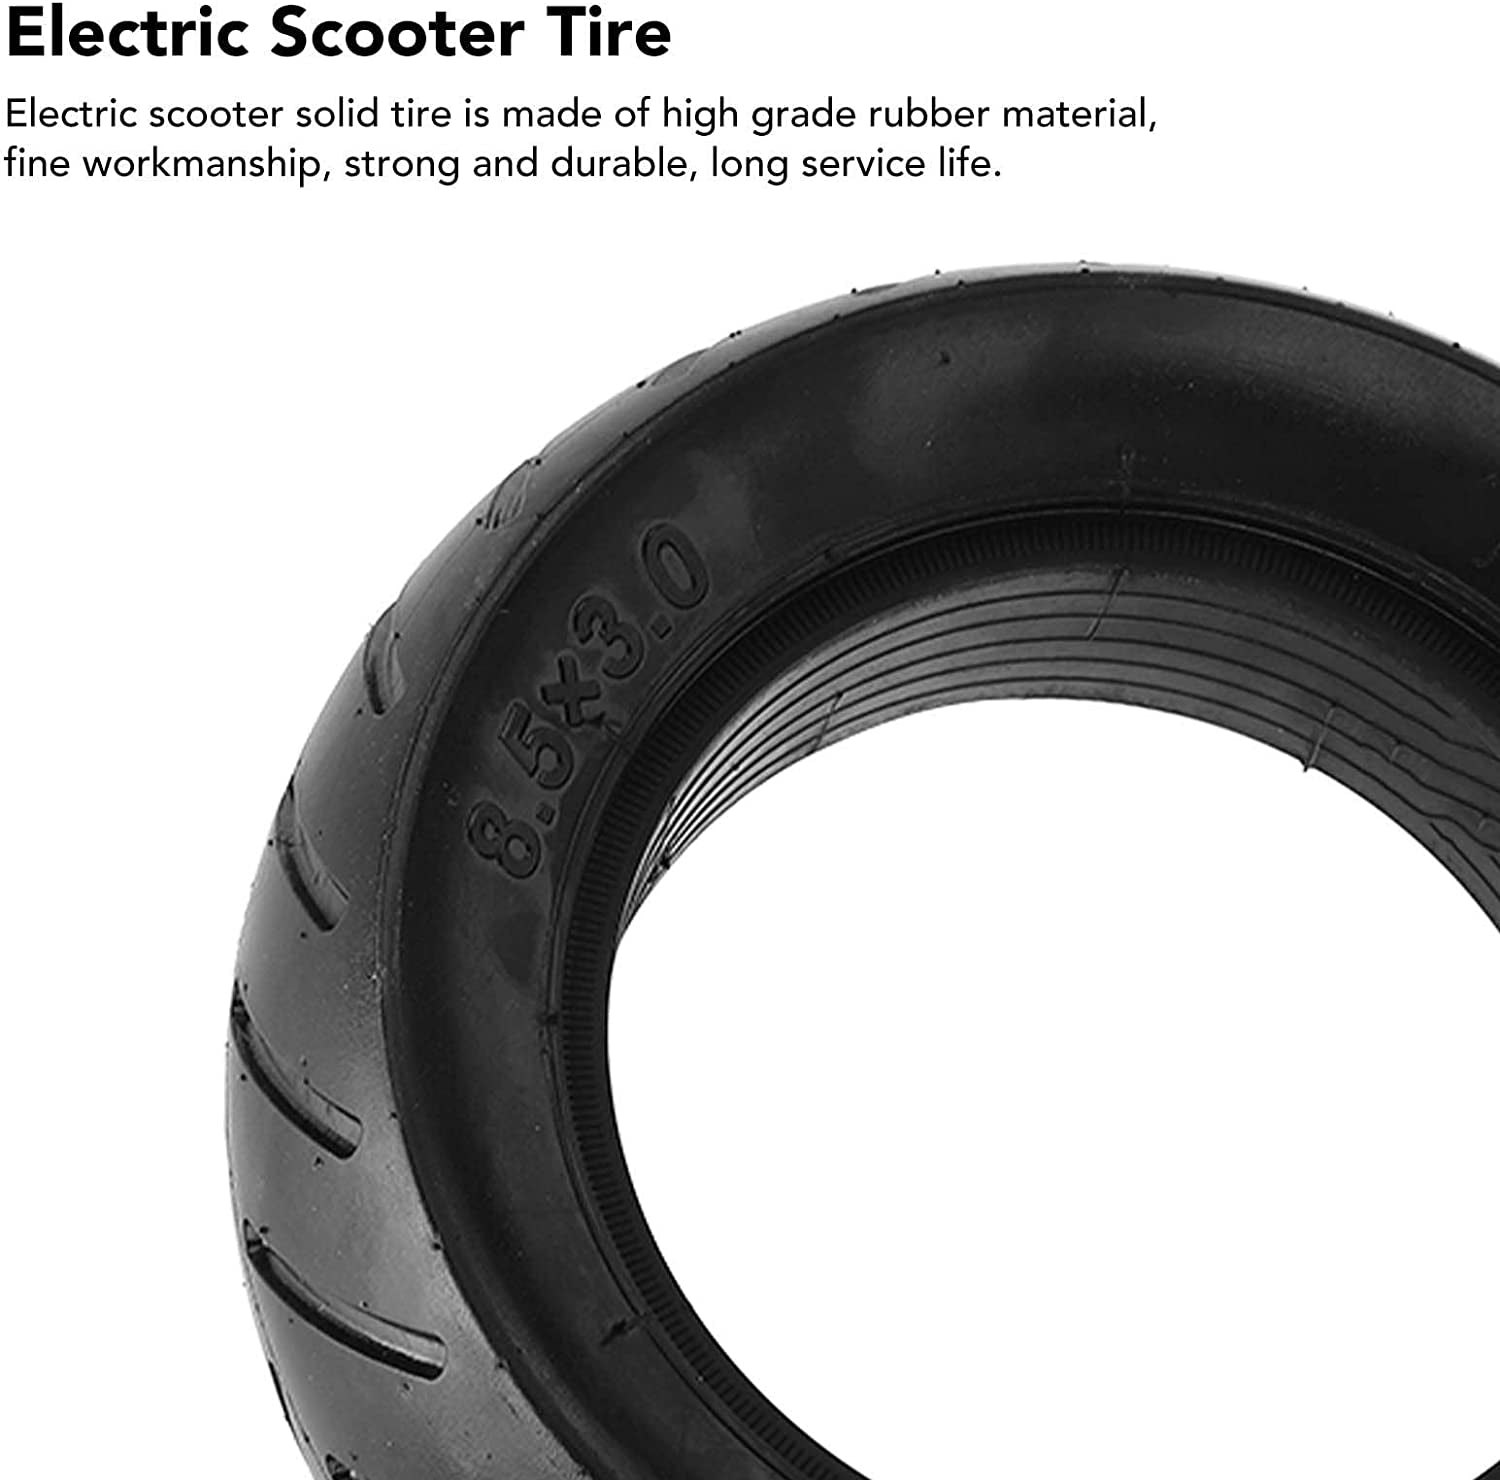 8.5 Inch 8.5x3.0 Electric Scooter Solid Tire For X1 Zero 8 Zero 9